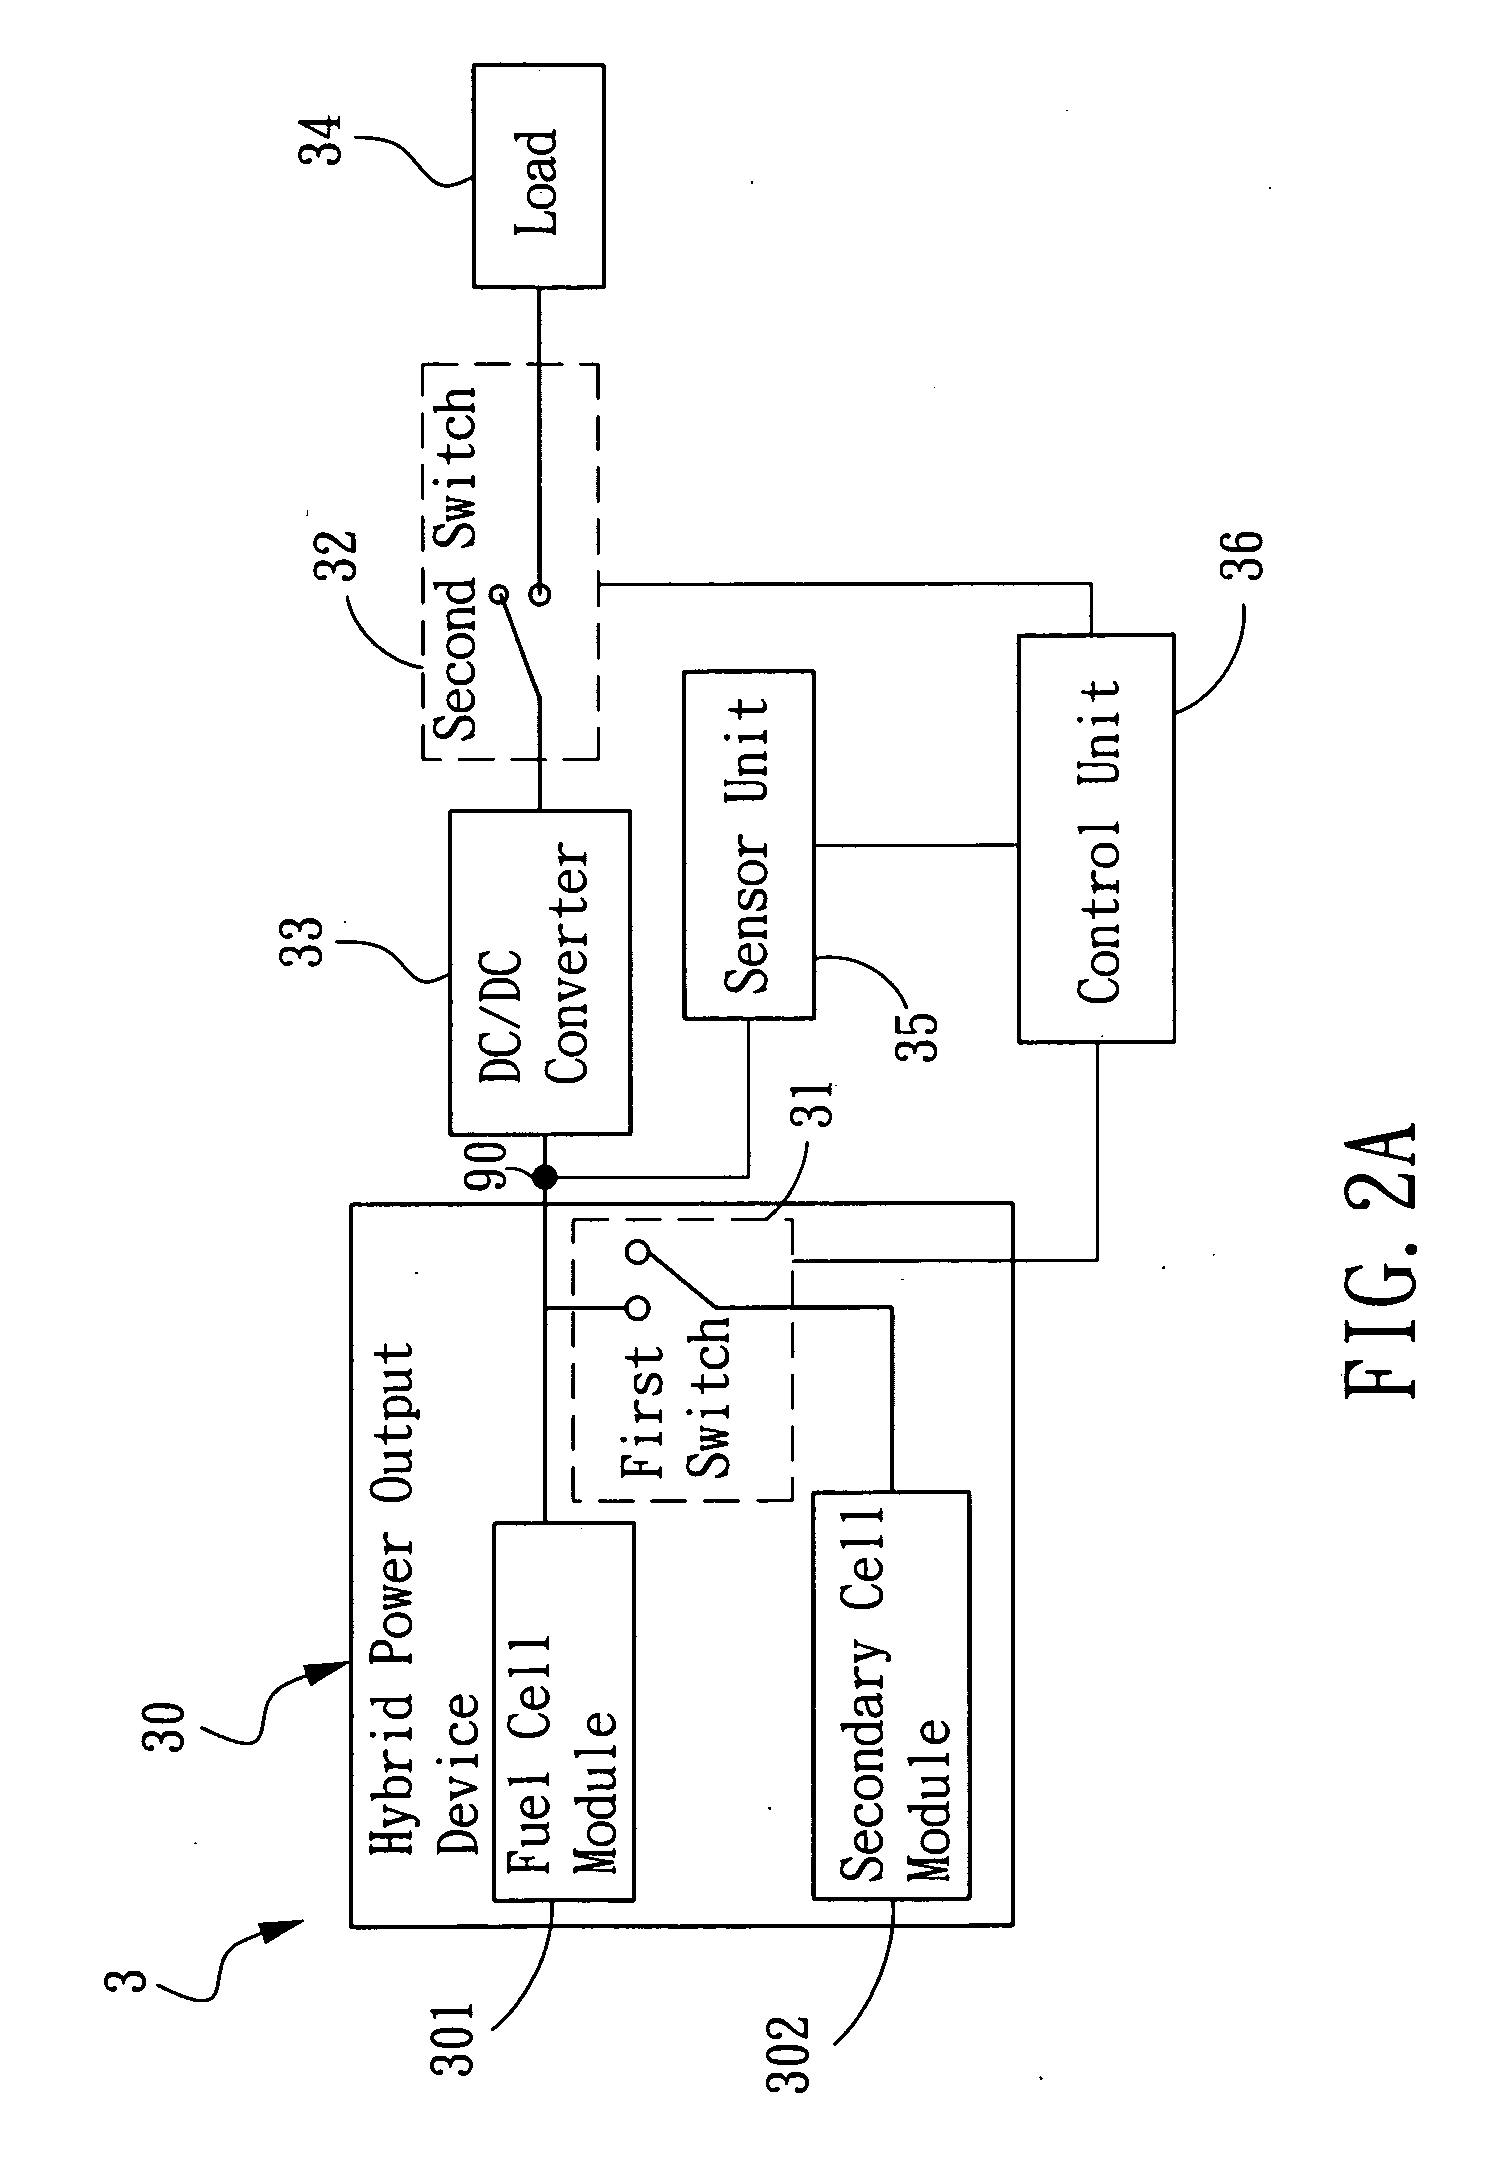 Method and system of hybrid power management